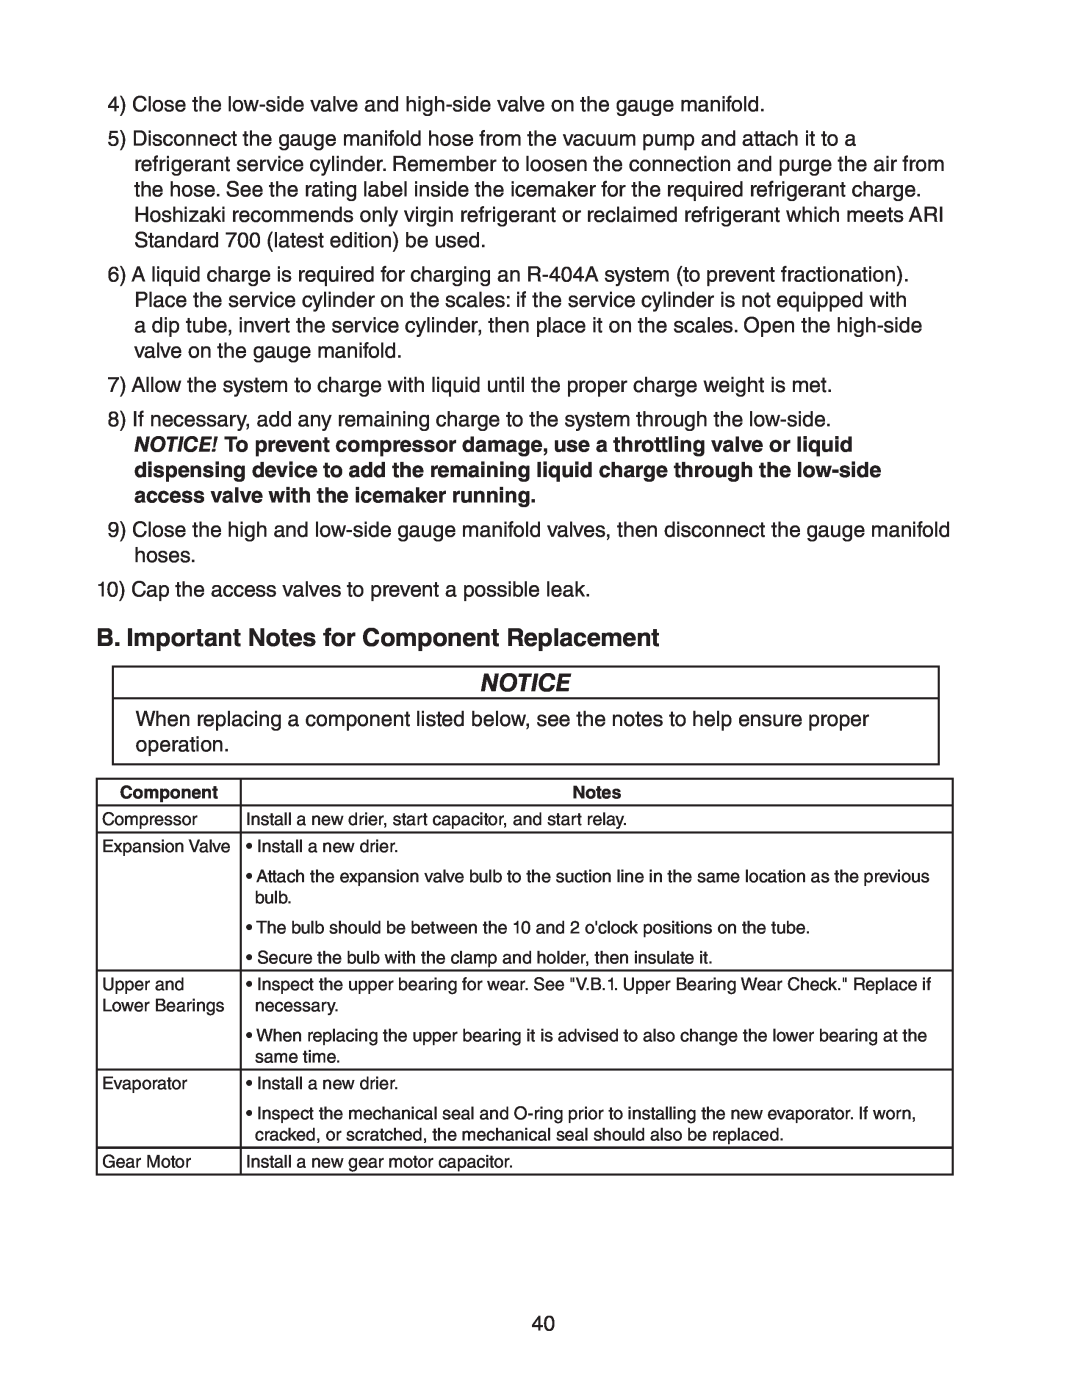 Hoshizaki DCM 300BAH(-OS) service manual B. Important Notes for Component Replacement 